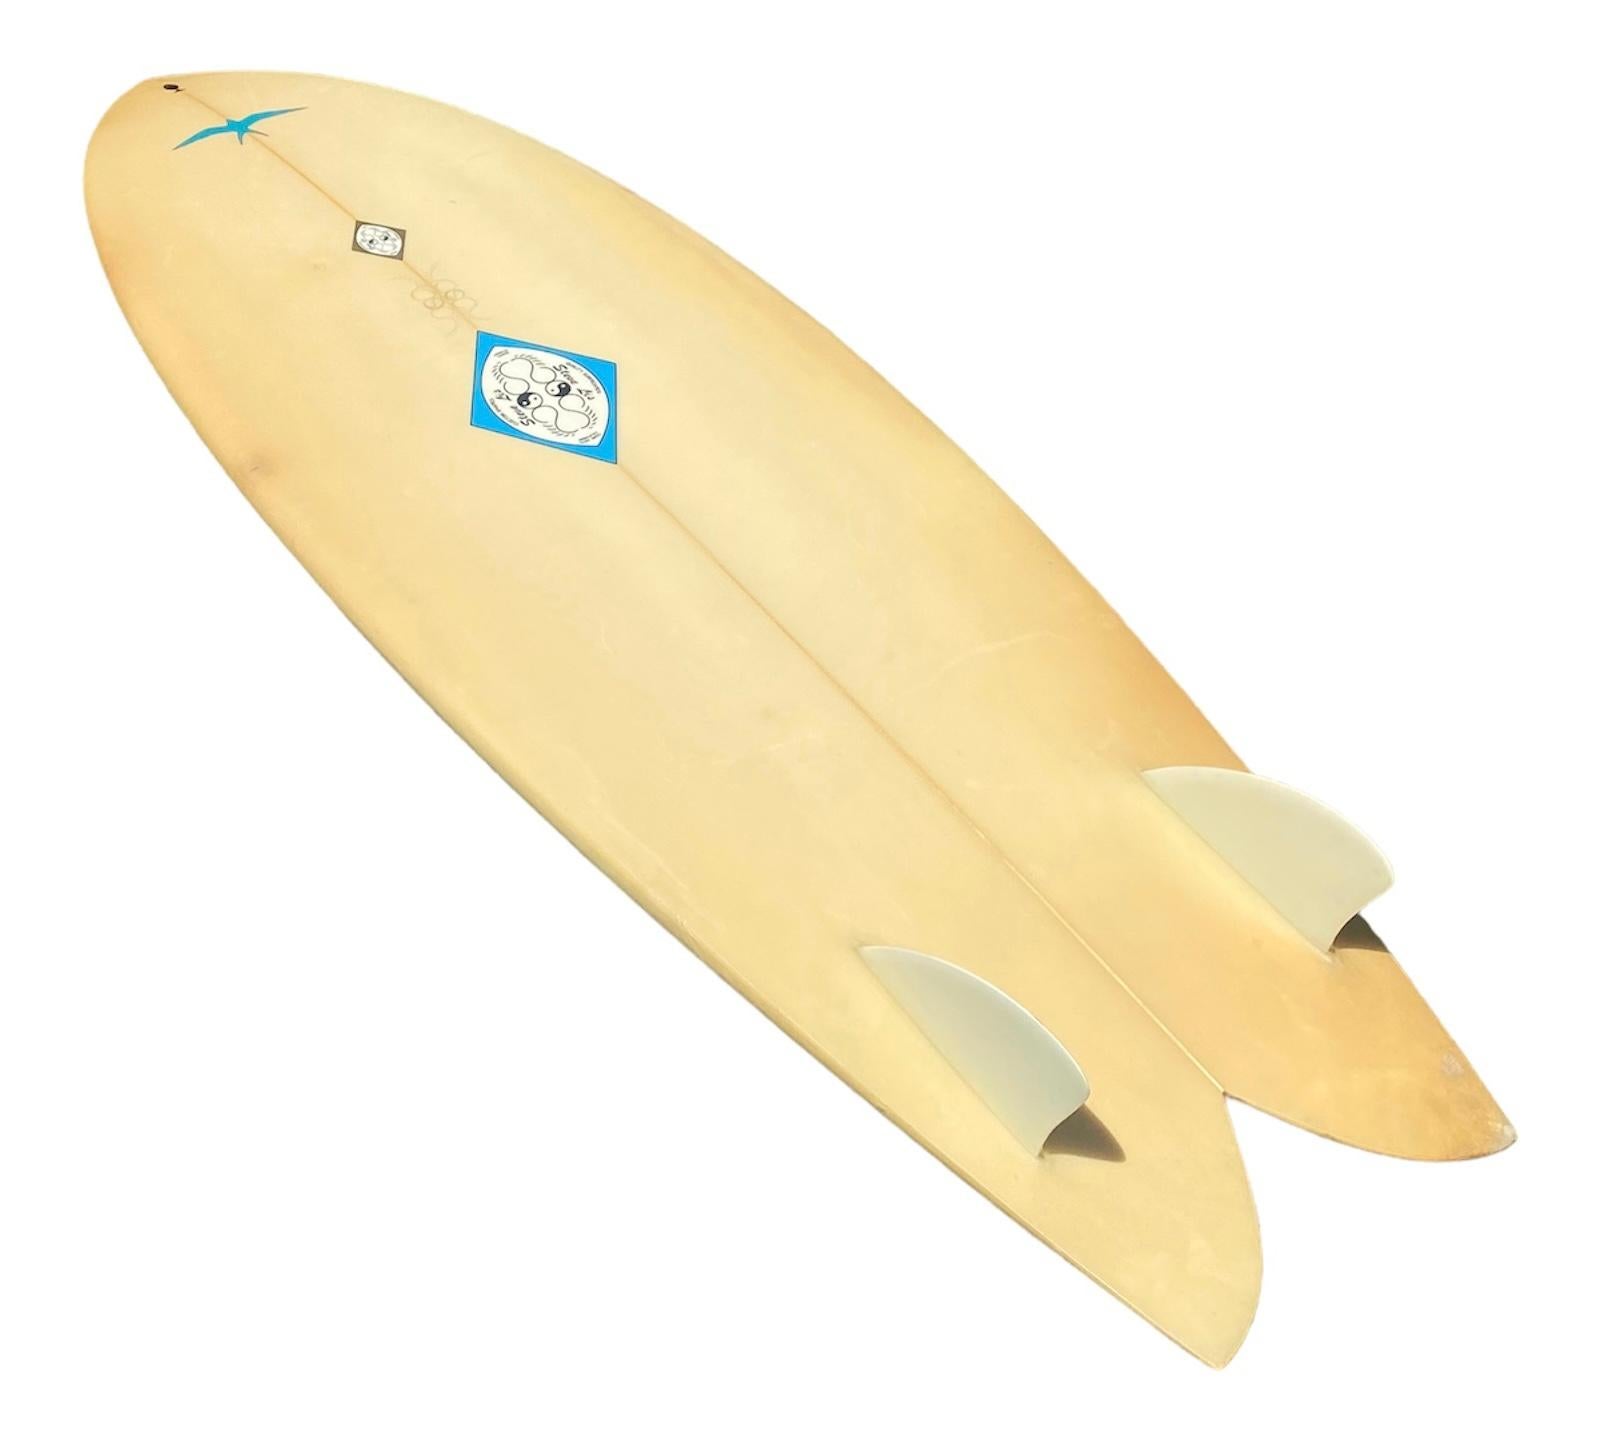 Steve Lis ‘Flaming’ Fish surfboard. Features the revolutionary fish shape which Steve Lis invented in the 1960s. Beautiful airbrush yellow-green fade with flames and glassed on twin-fins. Hand drawn yin and yang symbols written by Steve Lis on both